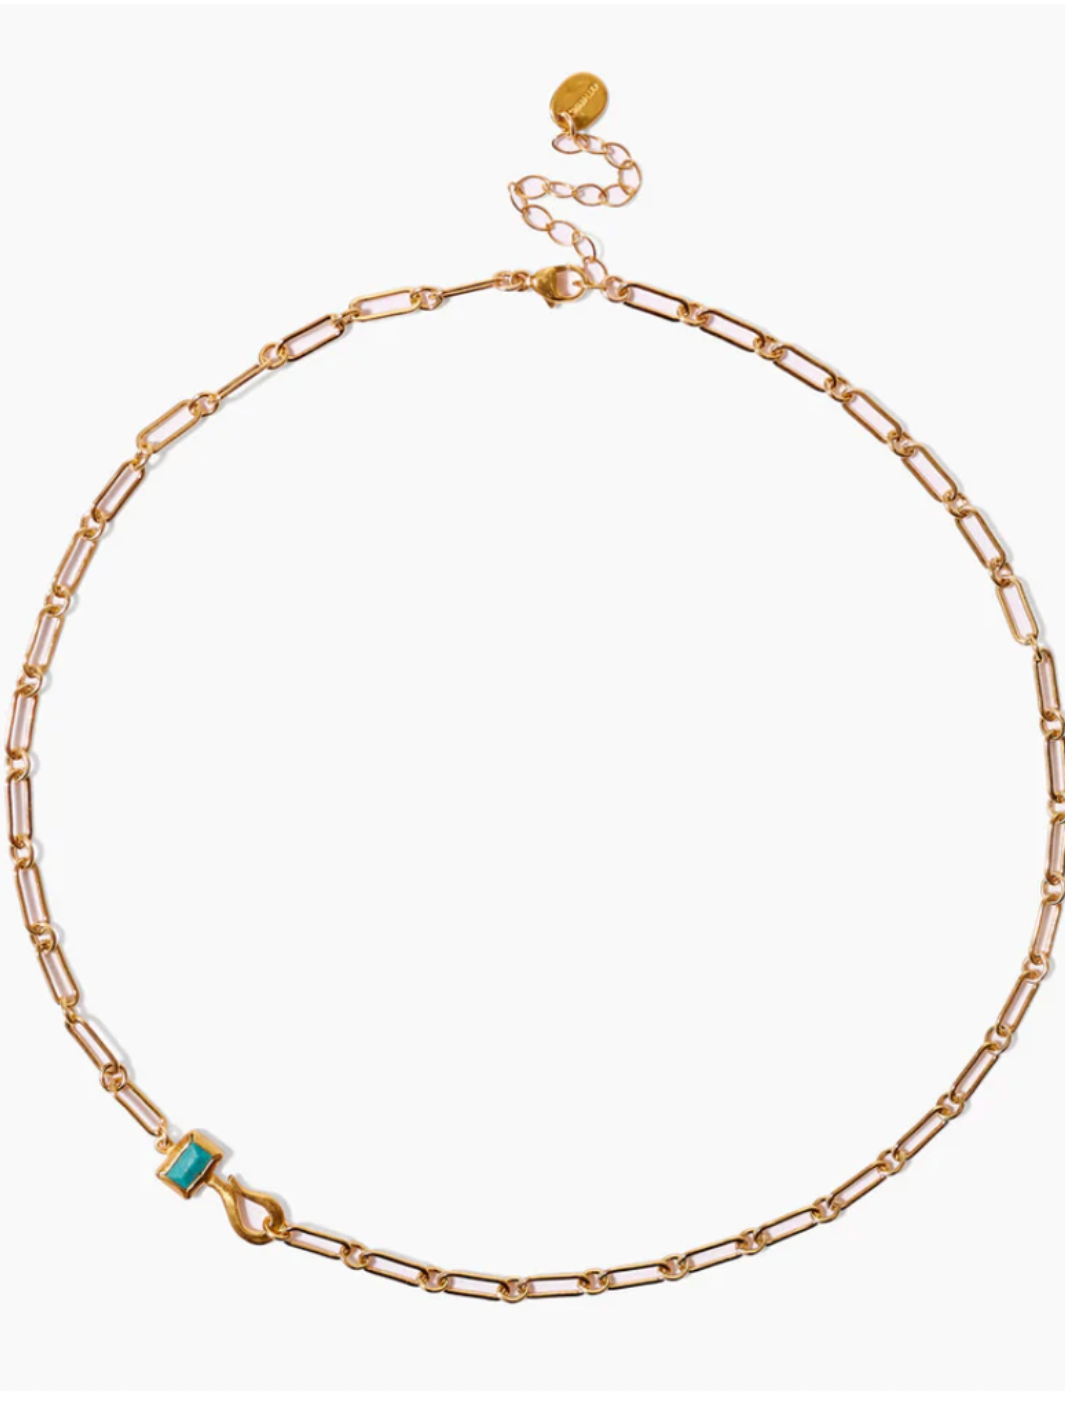 TURQUOISE ODYSSEY PAPERCLIP NECKLACE - Romi Boutique